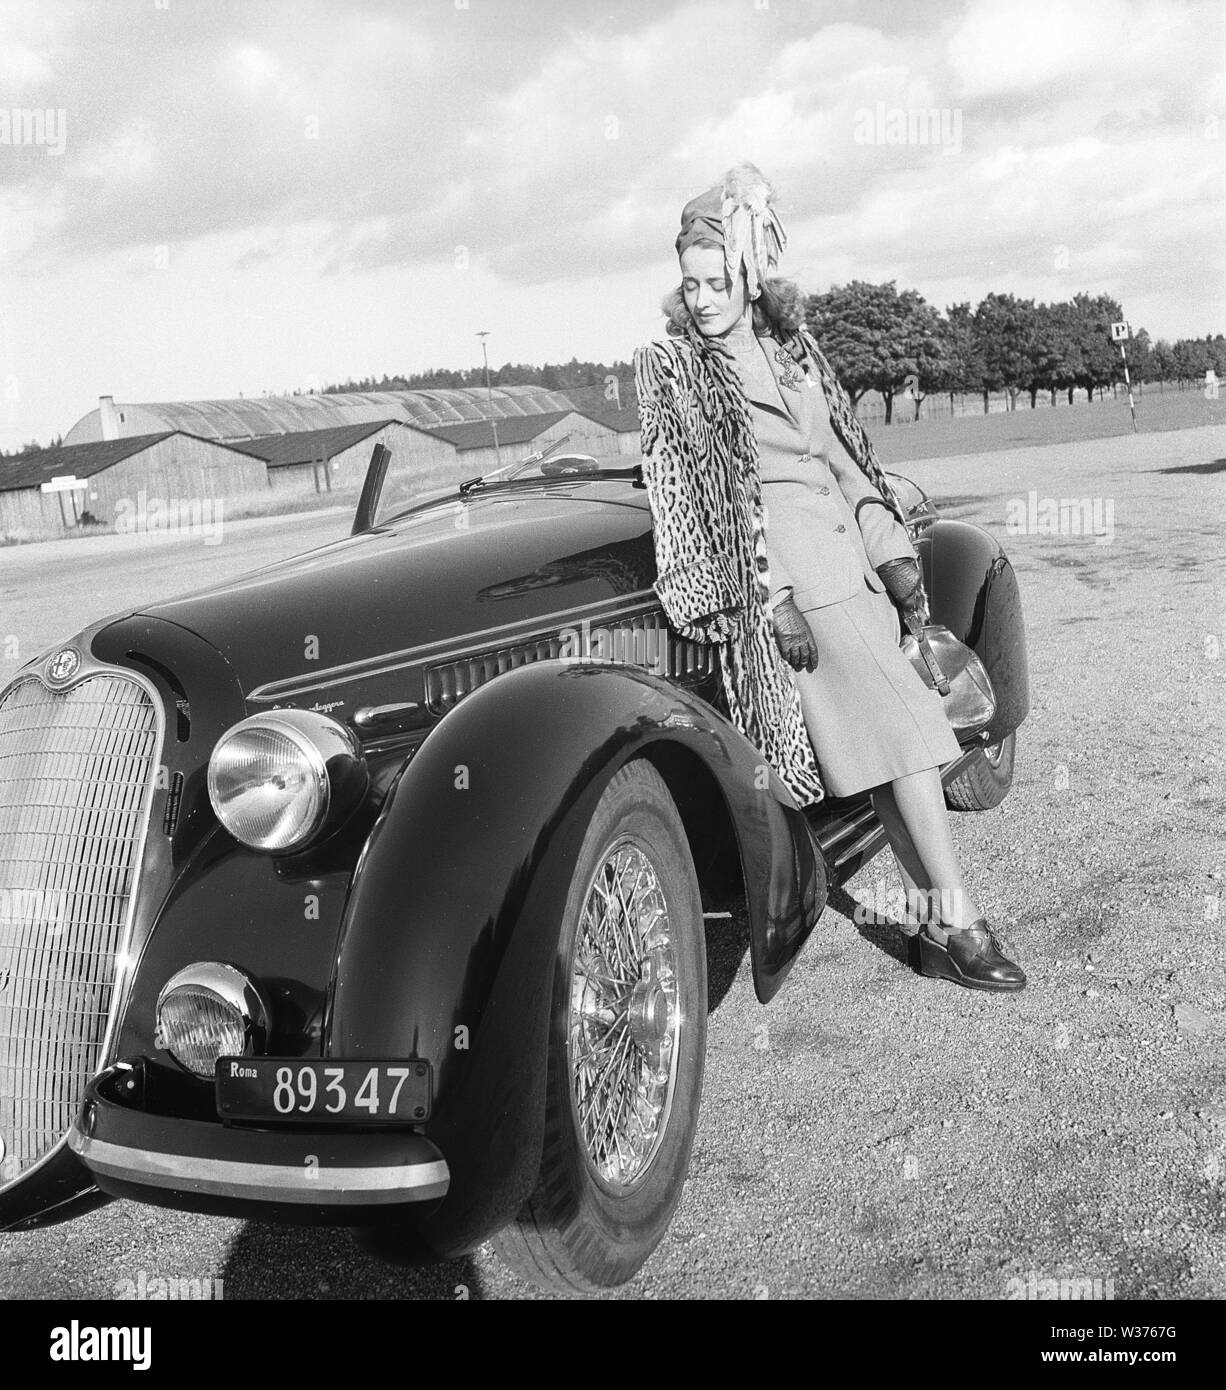 Women's fashion in the 1940s. A young woman in a typical 1940s outfit. A matching skirt and jacket with a leopard patterened coat hanging over her shoulders. The car is a italian sports car from the car manufacturer Alfa Romeo.   Sweden 1946. Kristoffersson Ref X1-5 Stock Photo